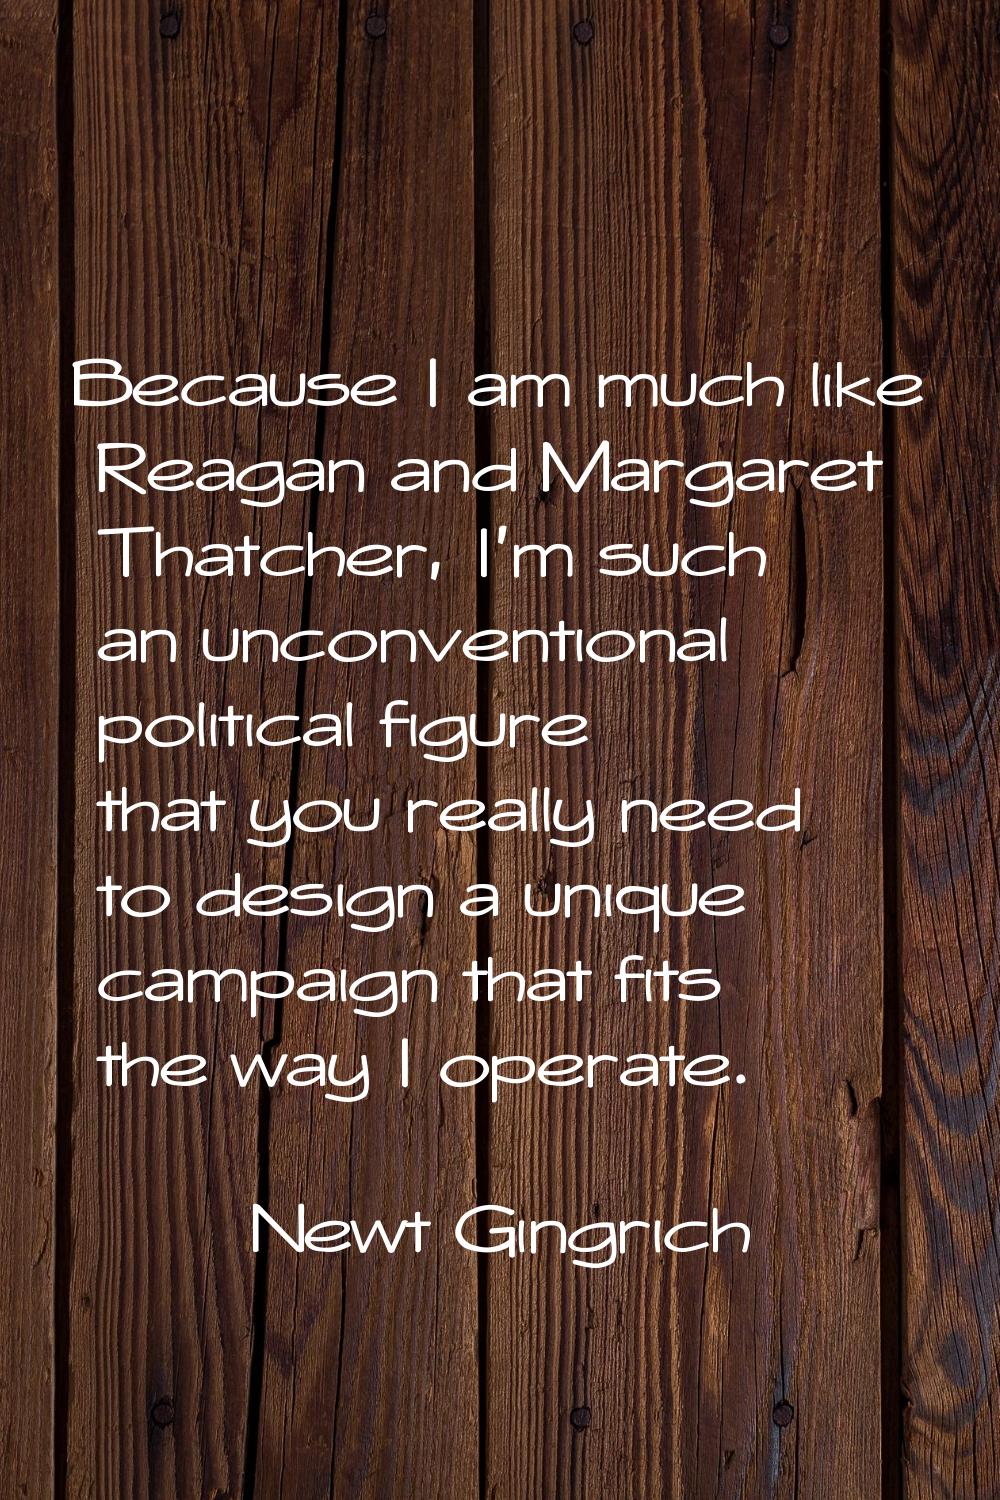 Because I am much like Reagan and Margaret Thatcher, I'm such an unconventional political figure th